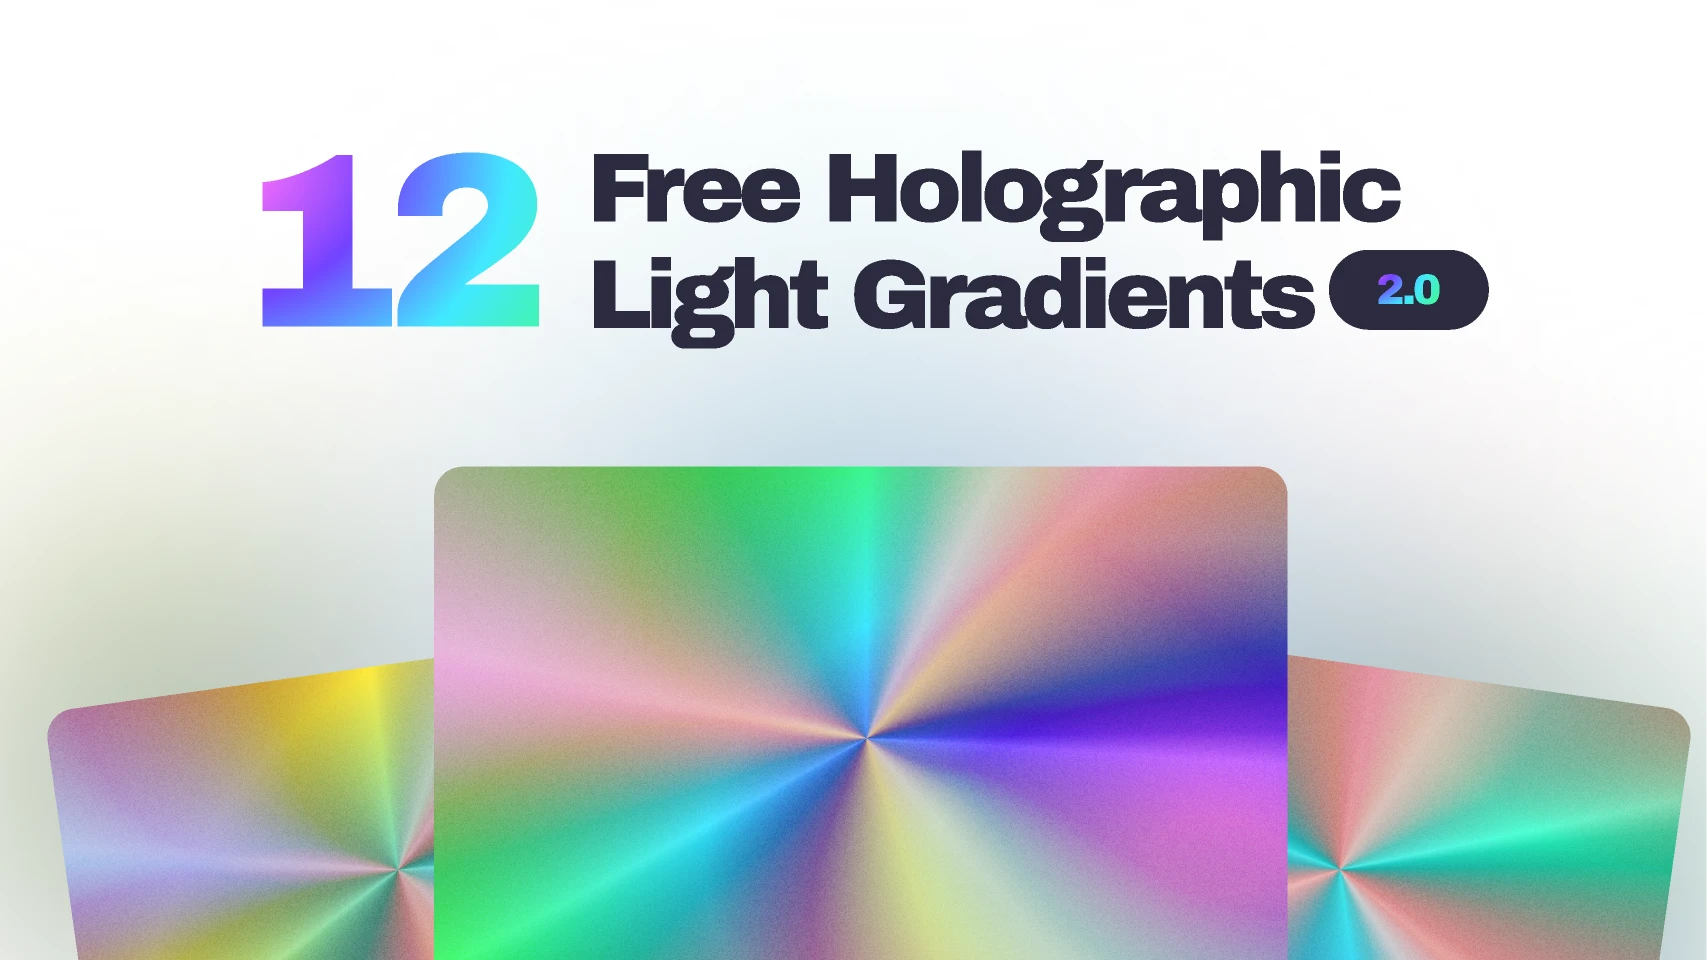 12 Free Holographic Light Gradients 2.0 for Figma and Adobe XD